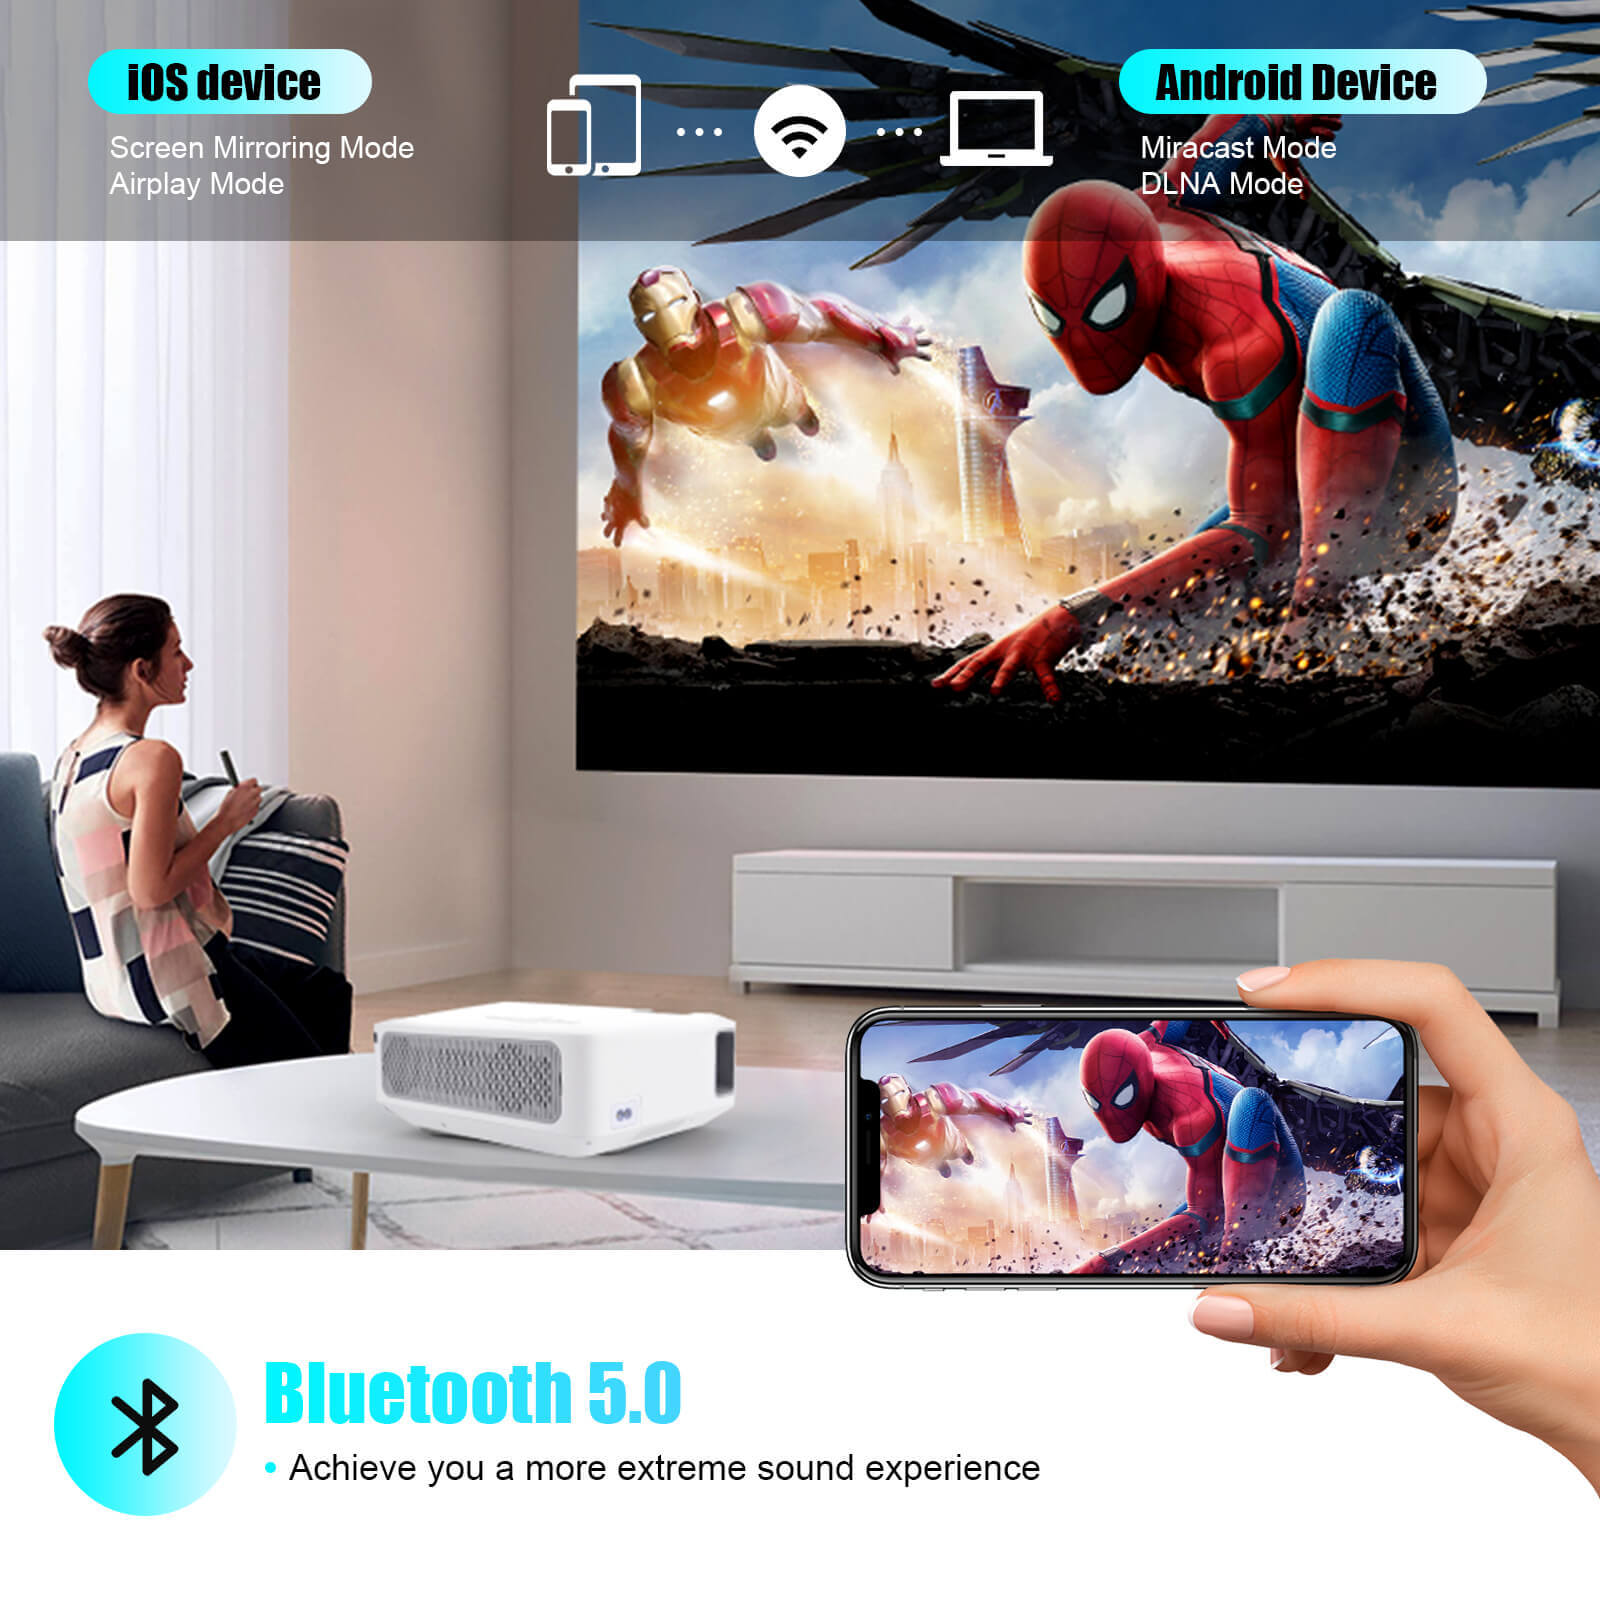 Android TV 9.0 Smart Projector,4k Projector with WiFi and Bluetooth,Native  1080P Movie Projector Outdoor,Xgody X1 Video Projector 4K Supported, Home  Theater Projector 